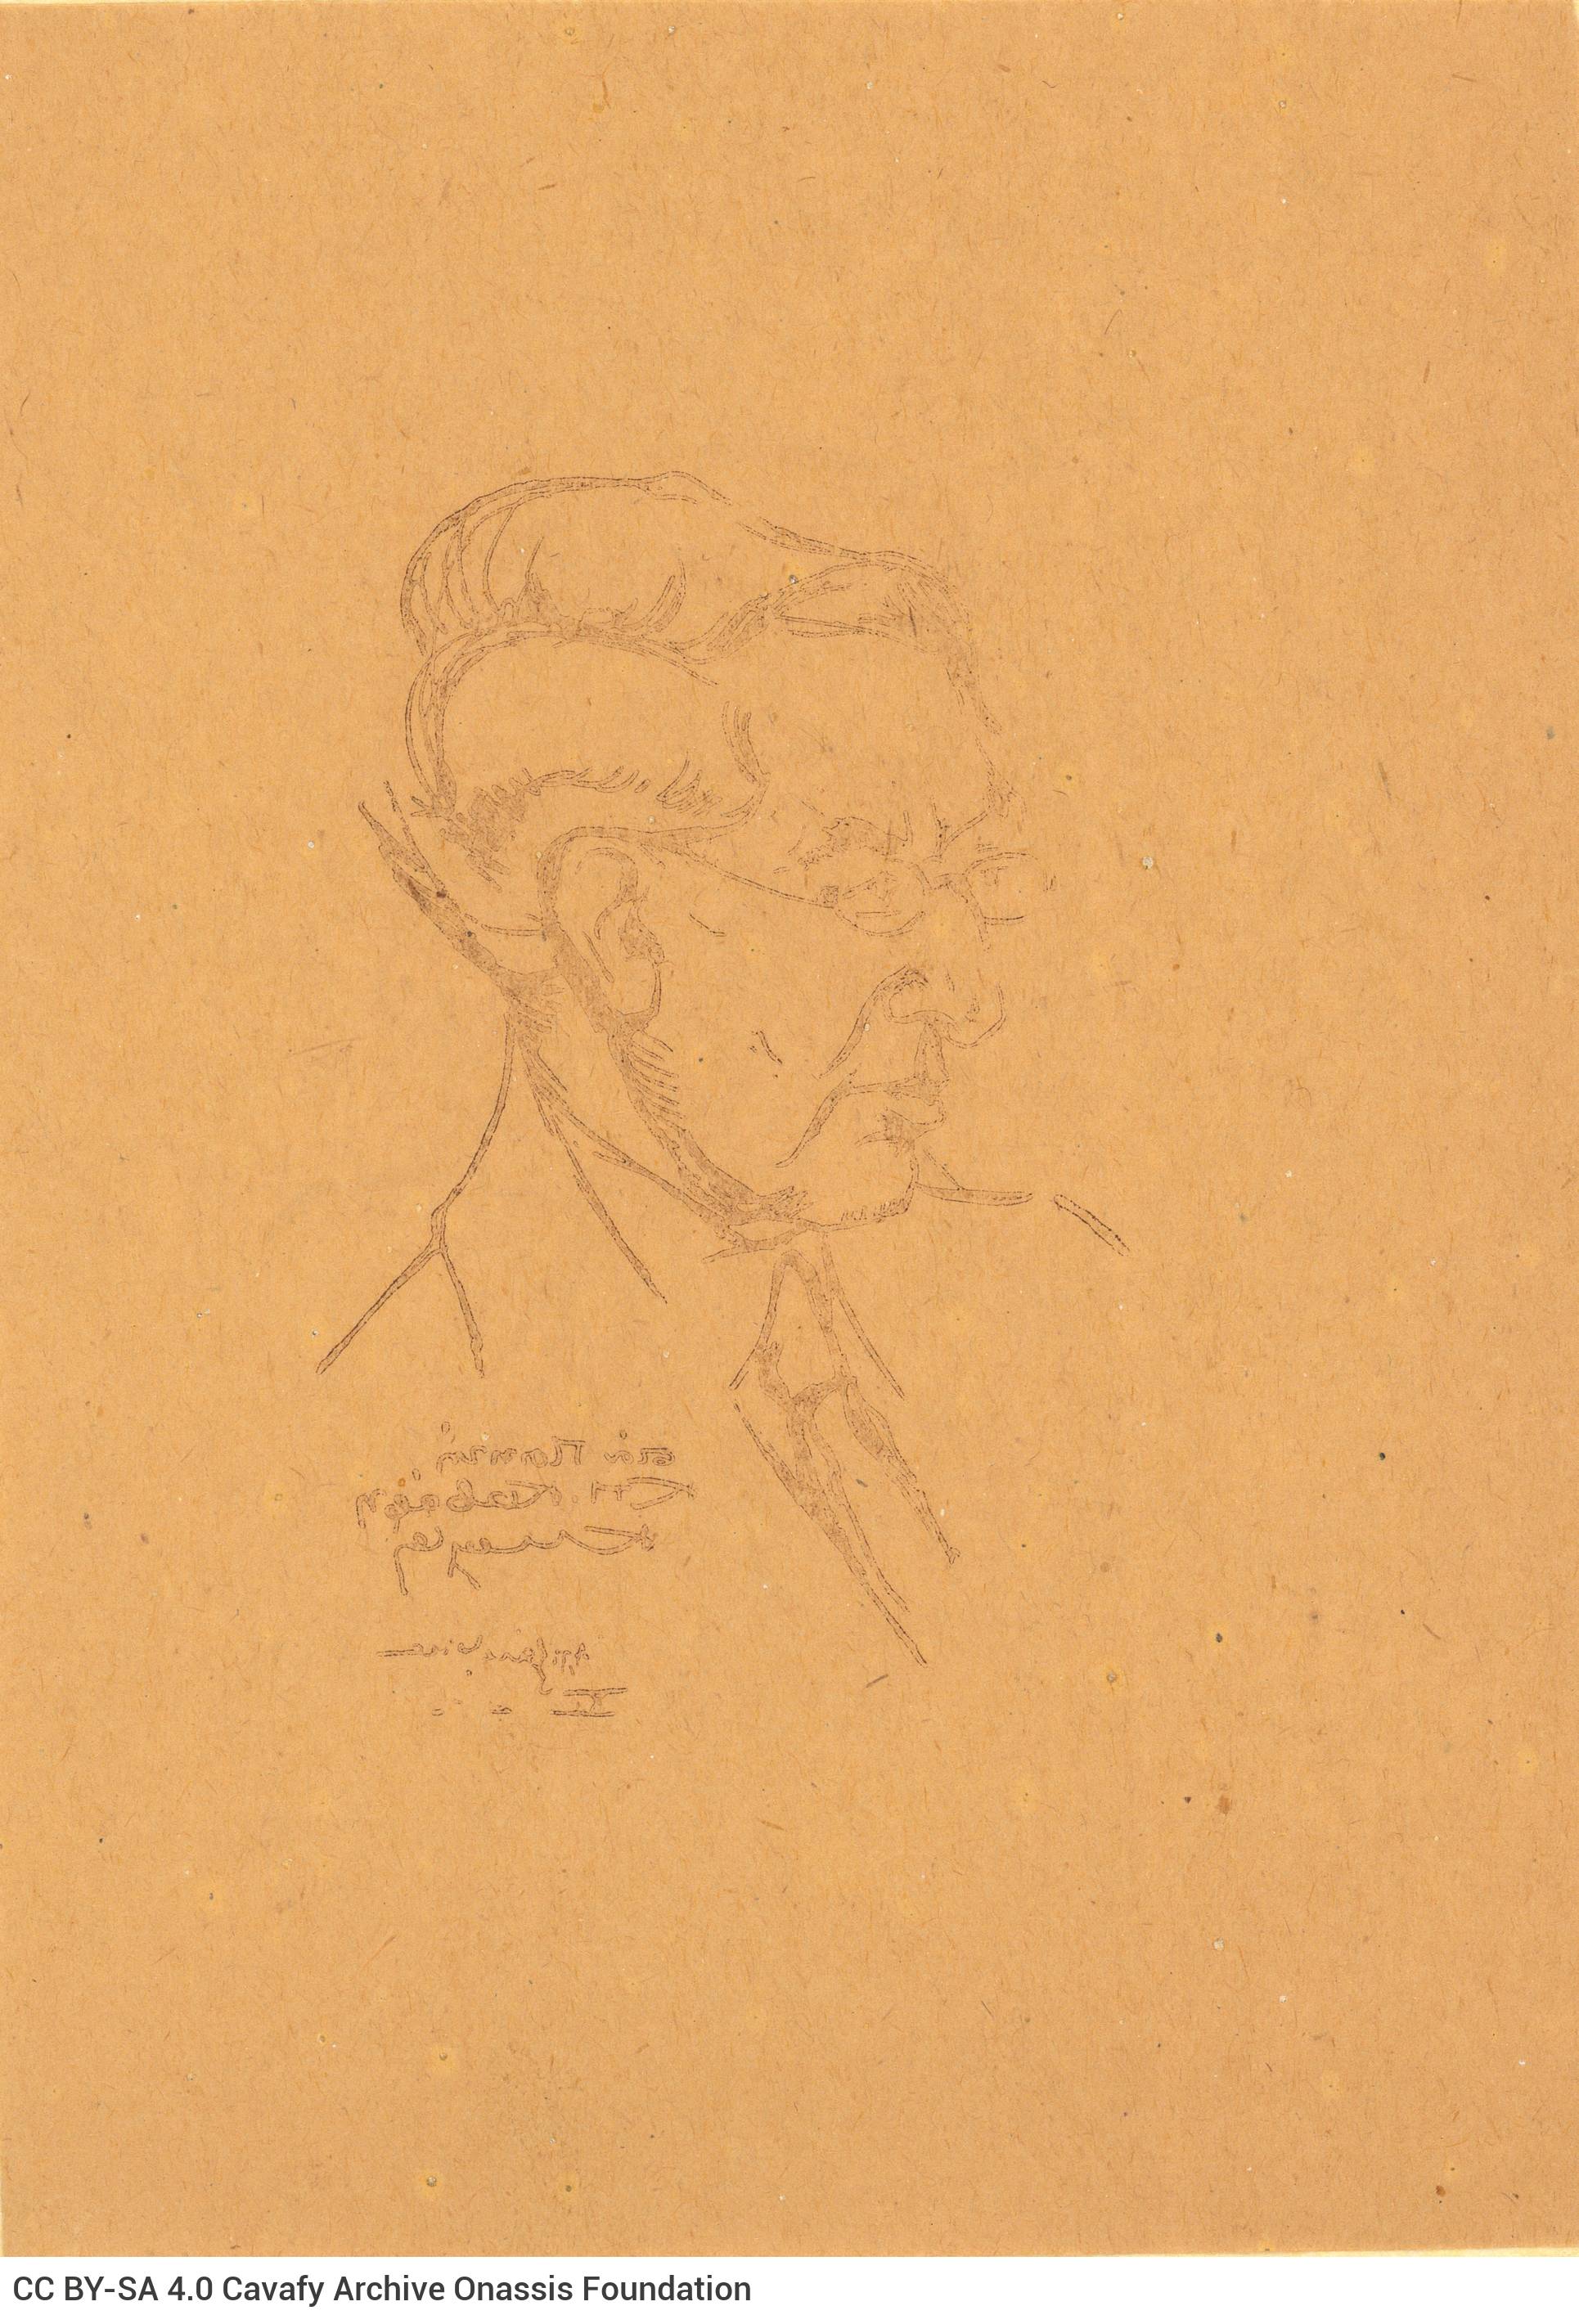 Eleven copies of a portrait of Cavafy by Konstantinos Maleas. The poet is depicted in profile, smiling, looking to the left. 